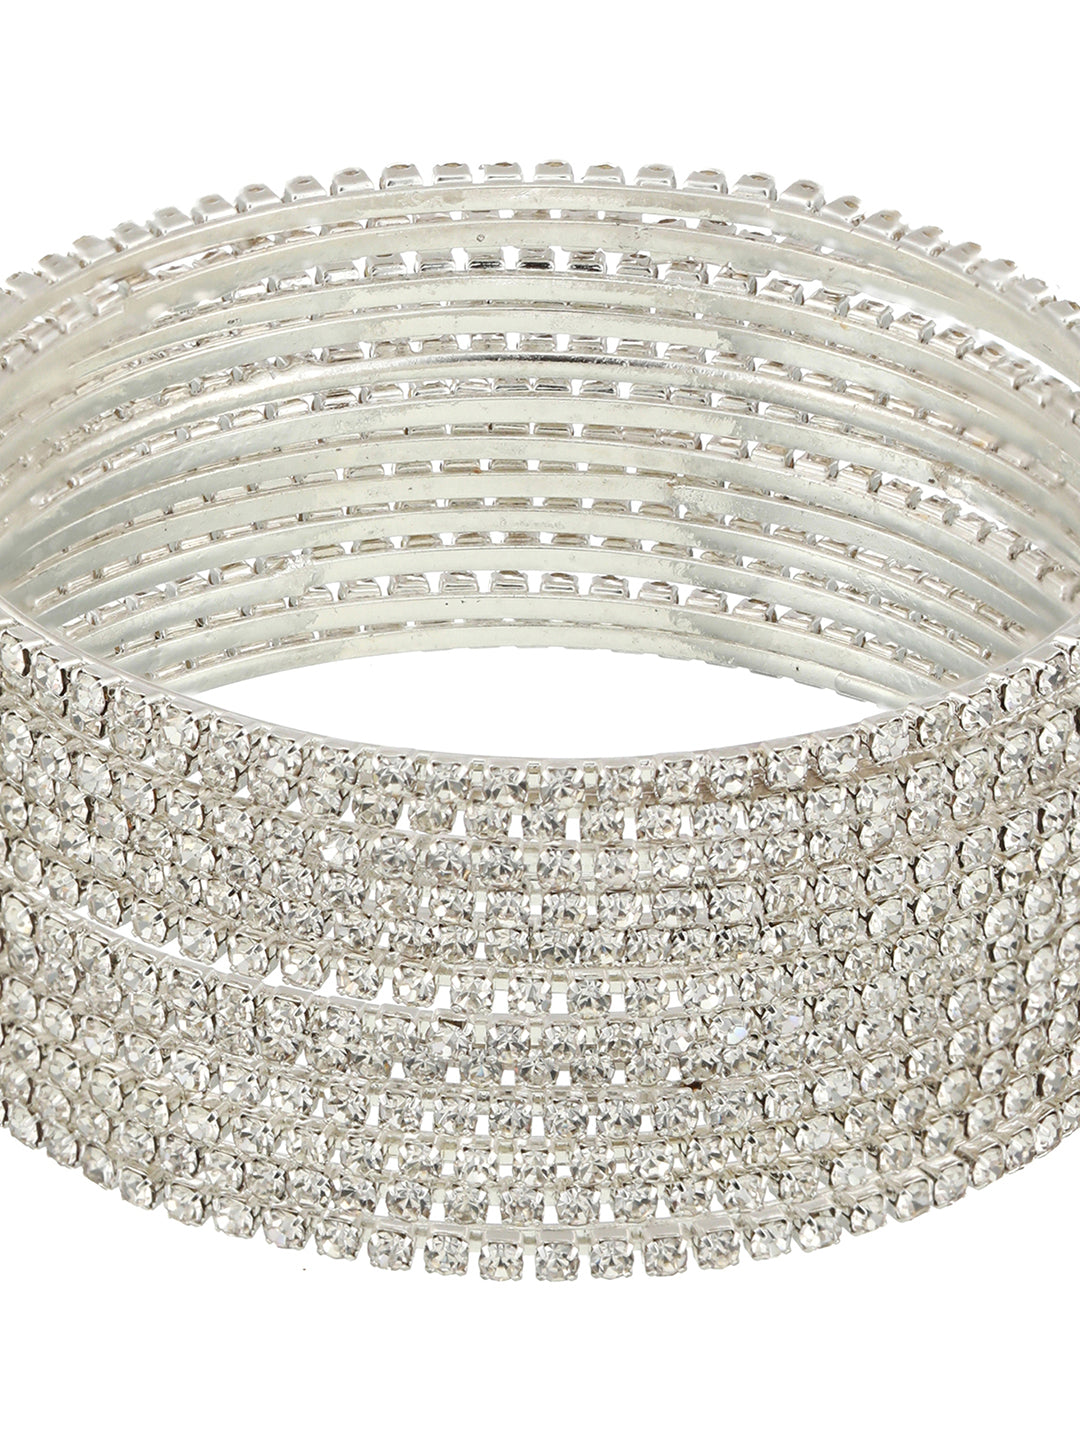 Set Of 12 Silver-Plated CZ-Studded Bangles